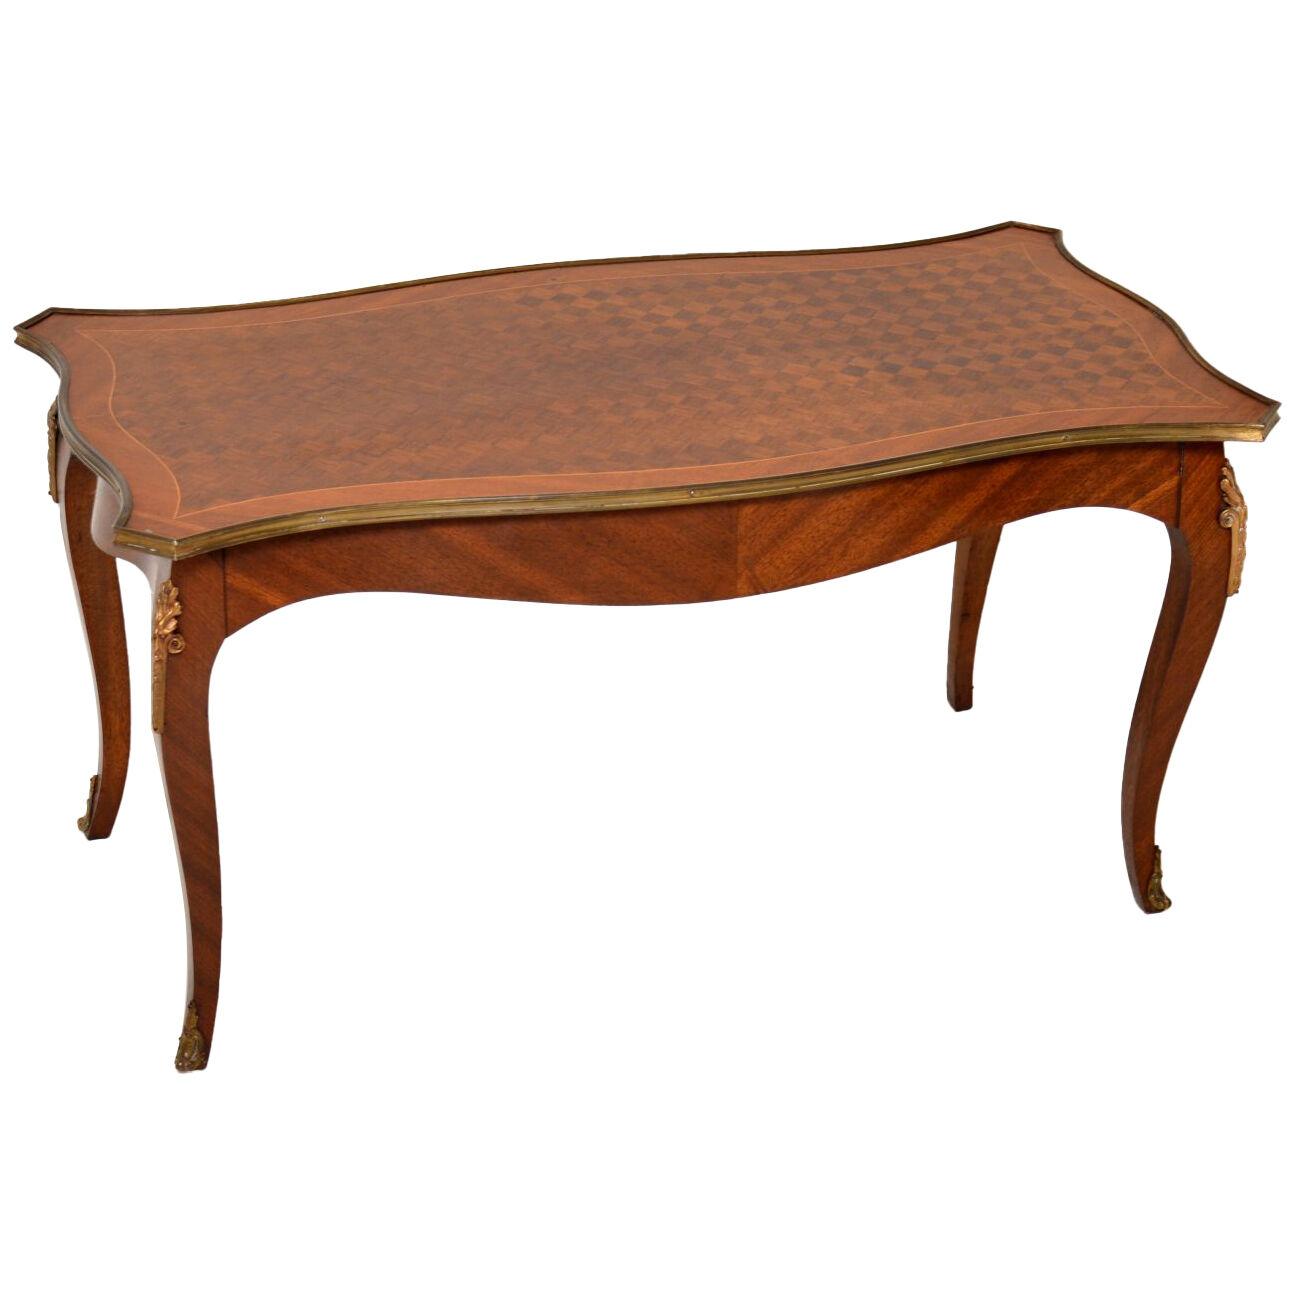 Antique French Parquetry Top Coffee Table